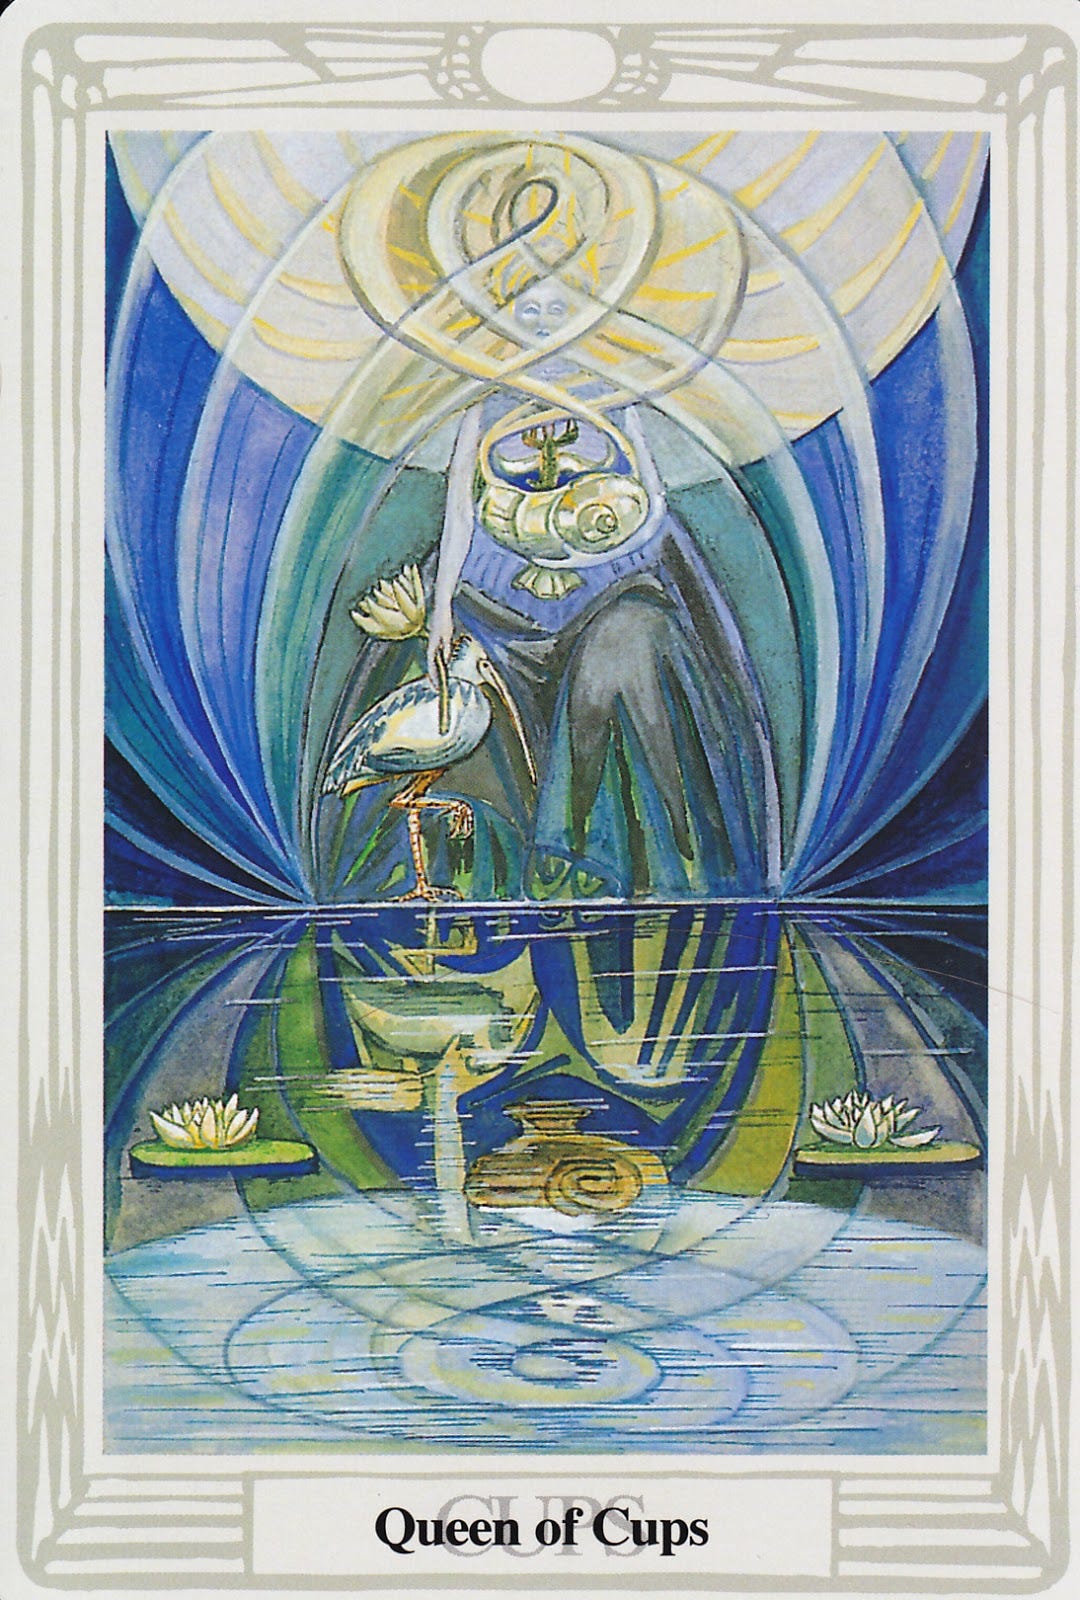 Queen of Cups Thoth Tarot Card Tutorial - Esoteric Meanings